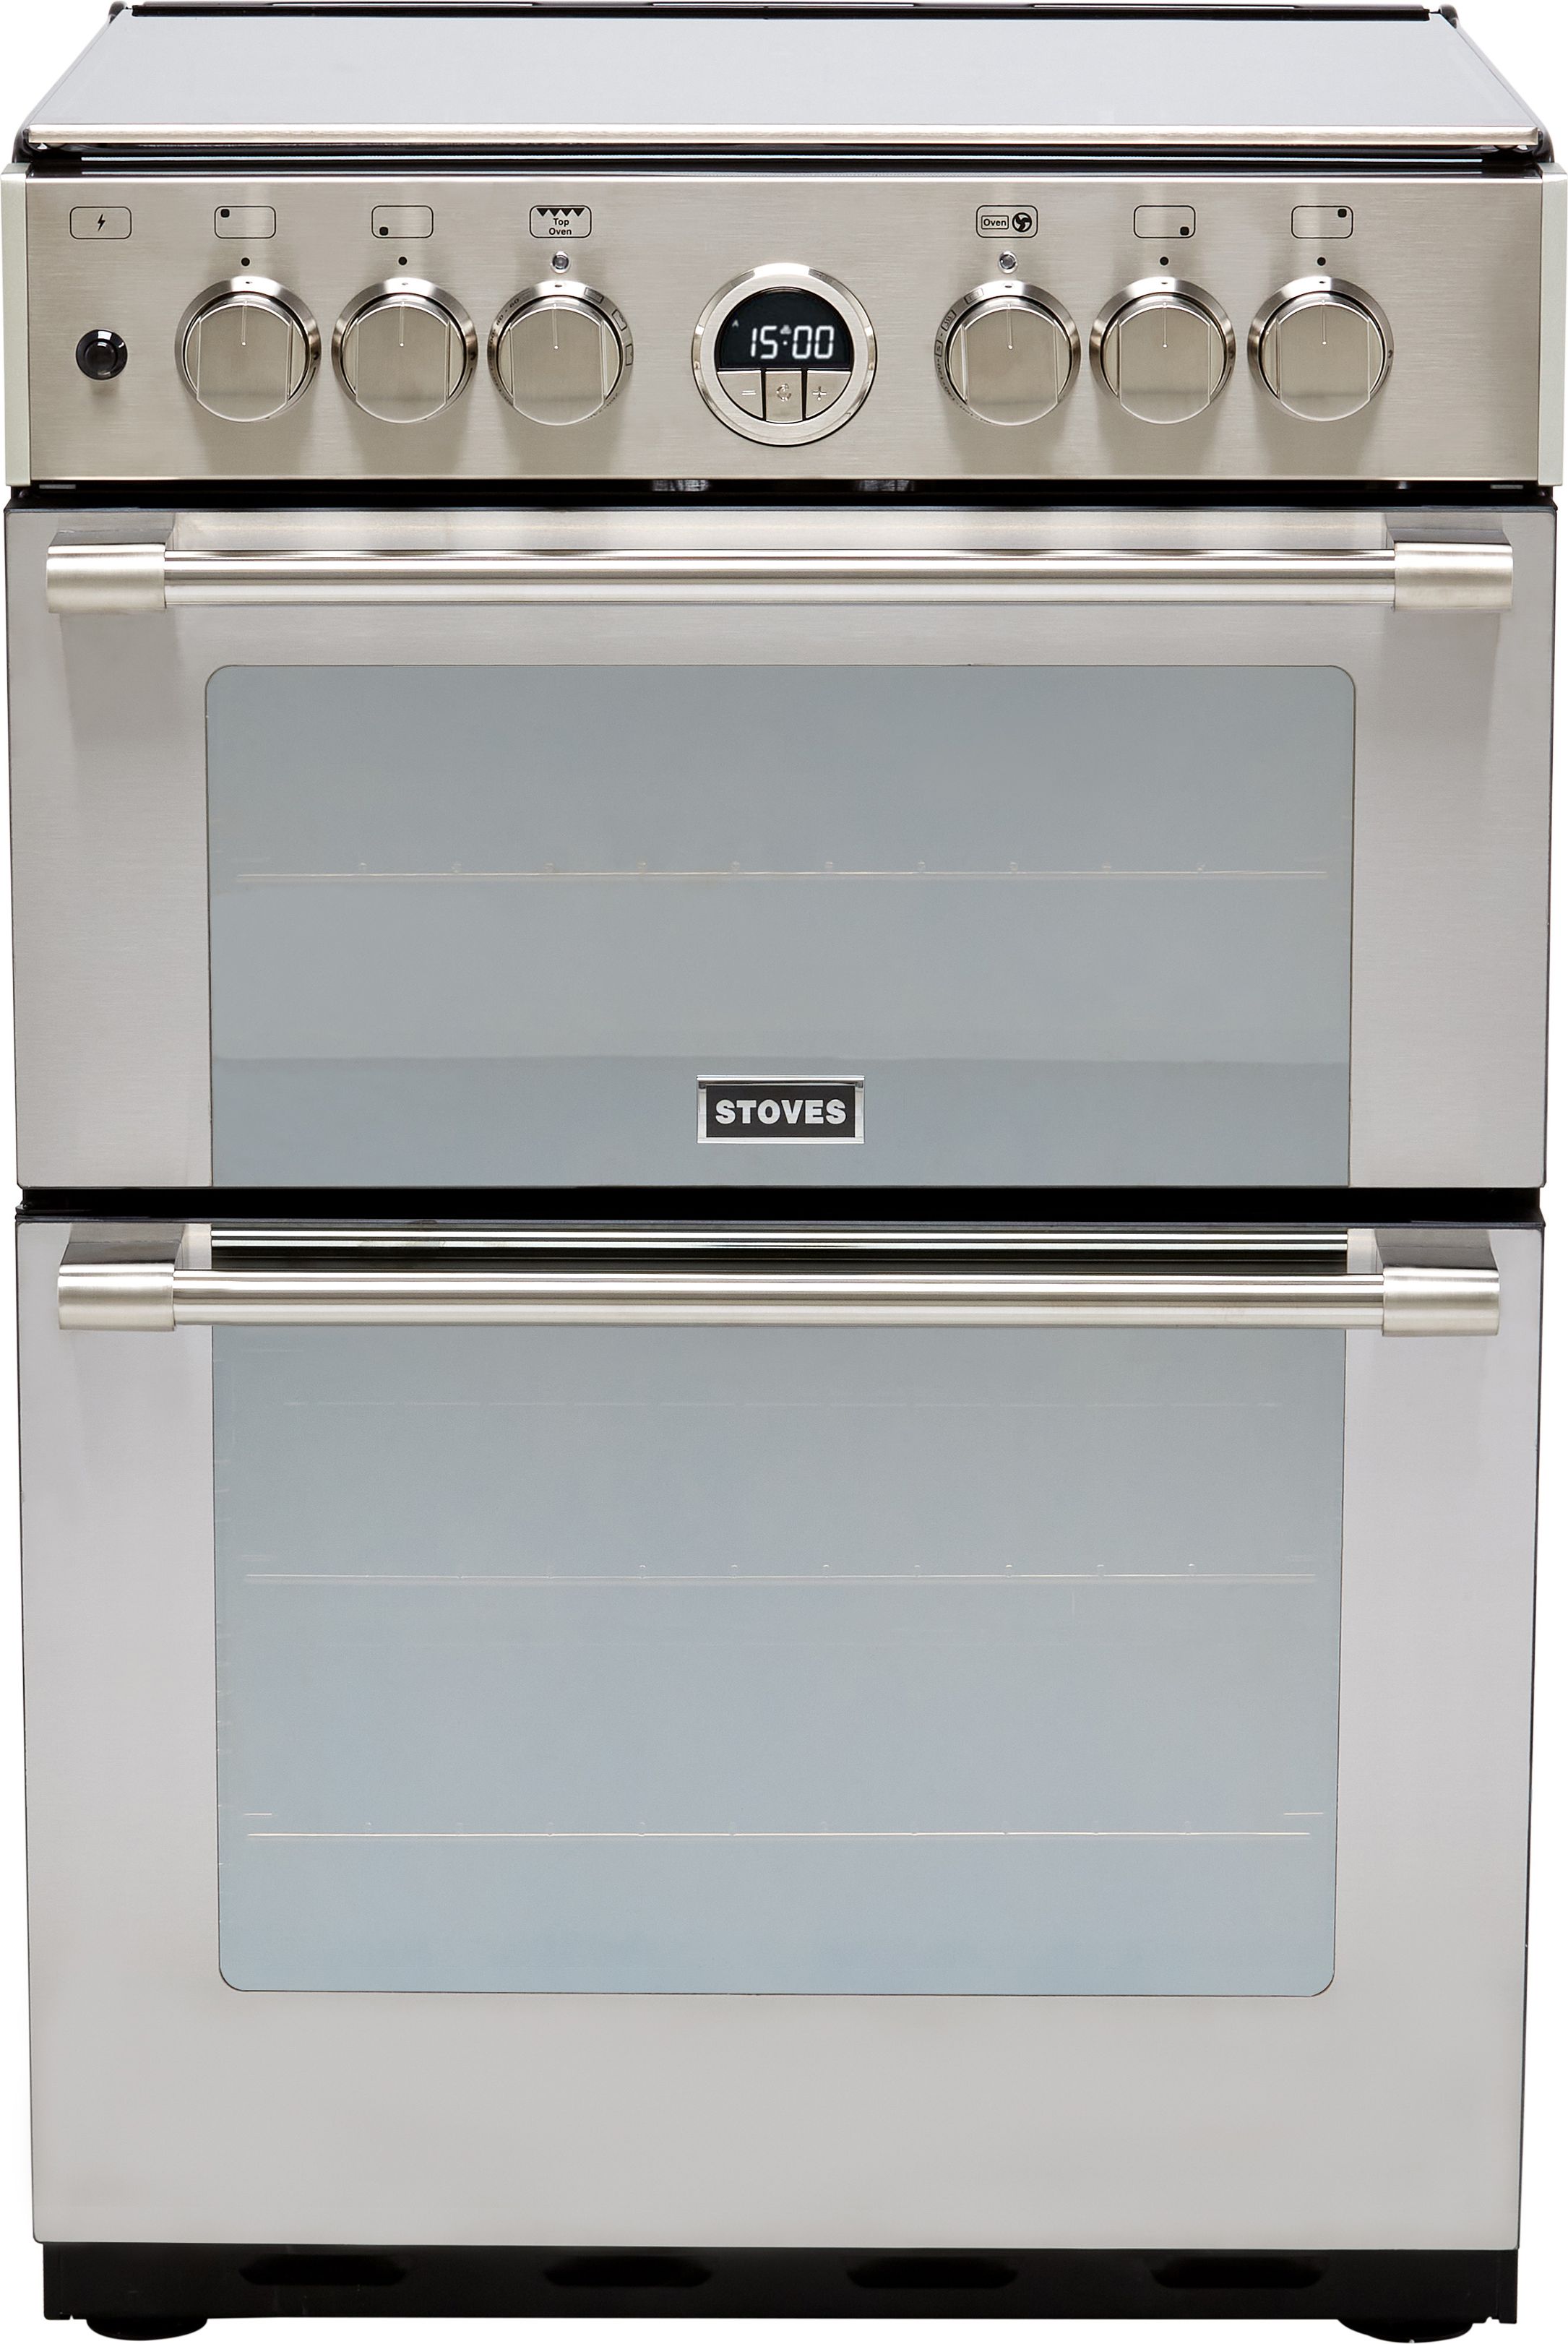 Stoves Sterling STERLING600DF 60cm Freestanding Dual Fuel Cooker - Stainless Steel - A/A Rated, Stainless Steel